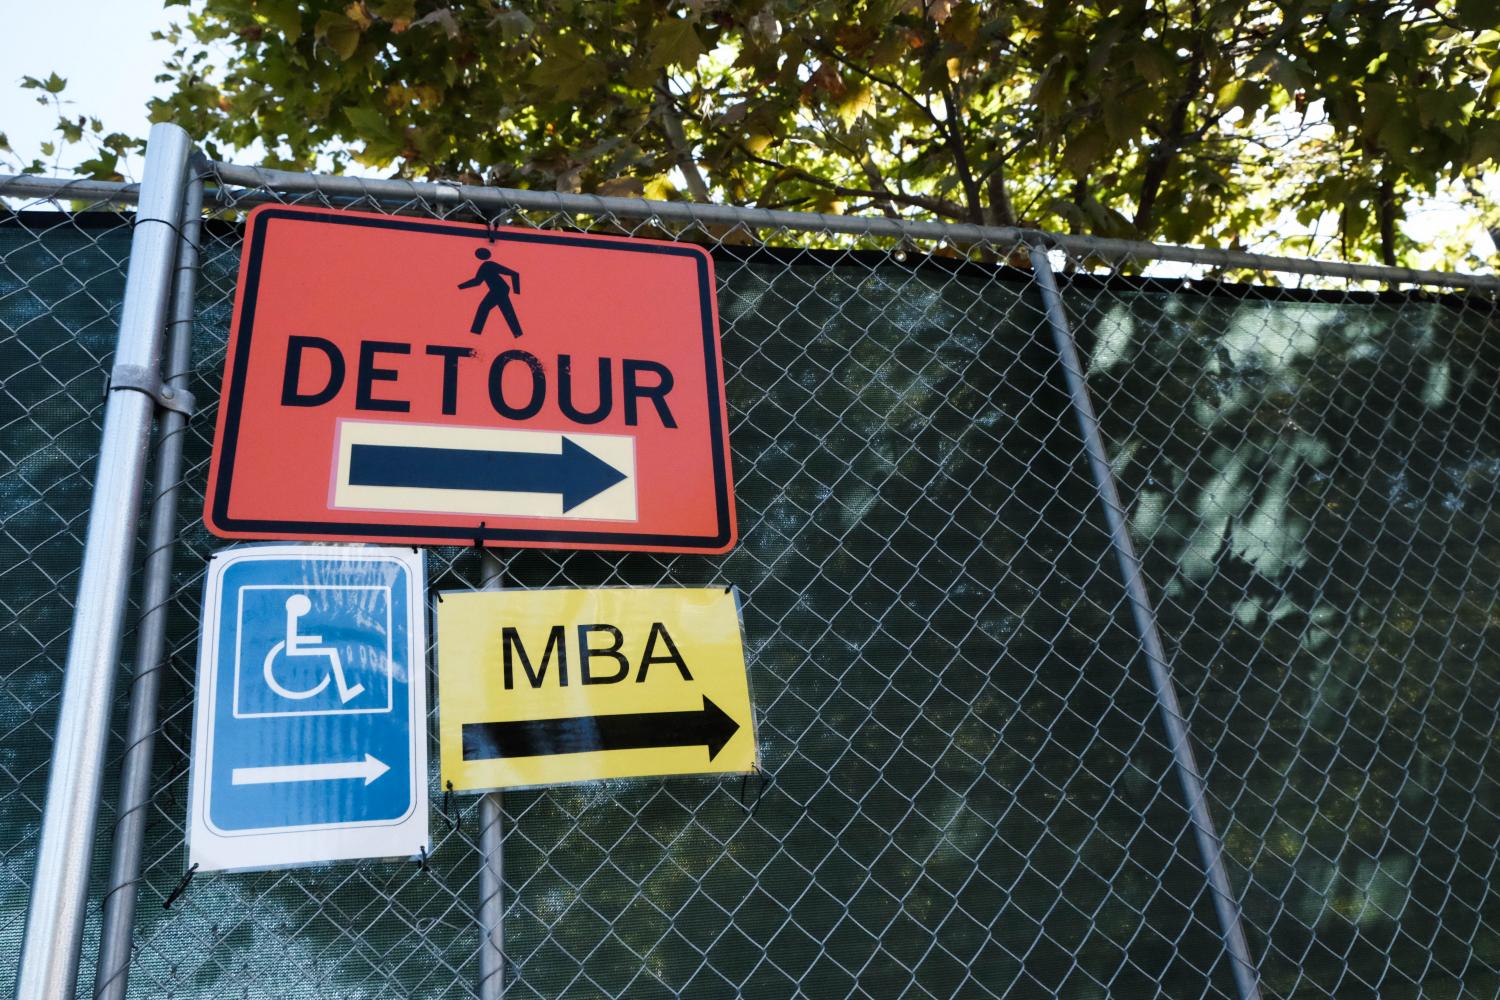 Signs indicate that pedestrians must take a detour around the Administration Building due to construction. Photo credit: Emma Dimaggio